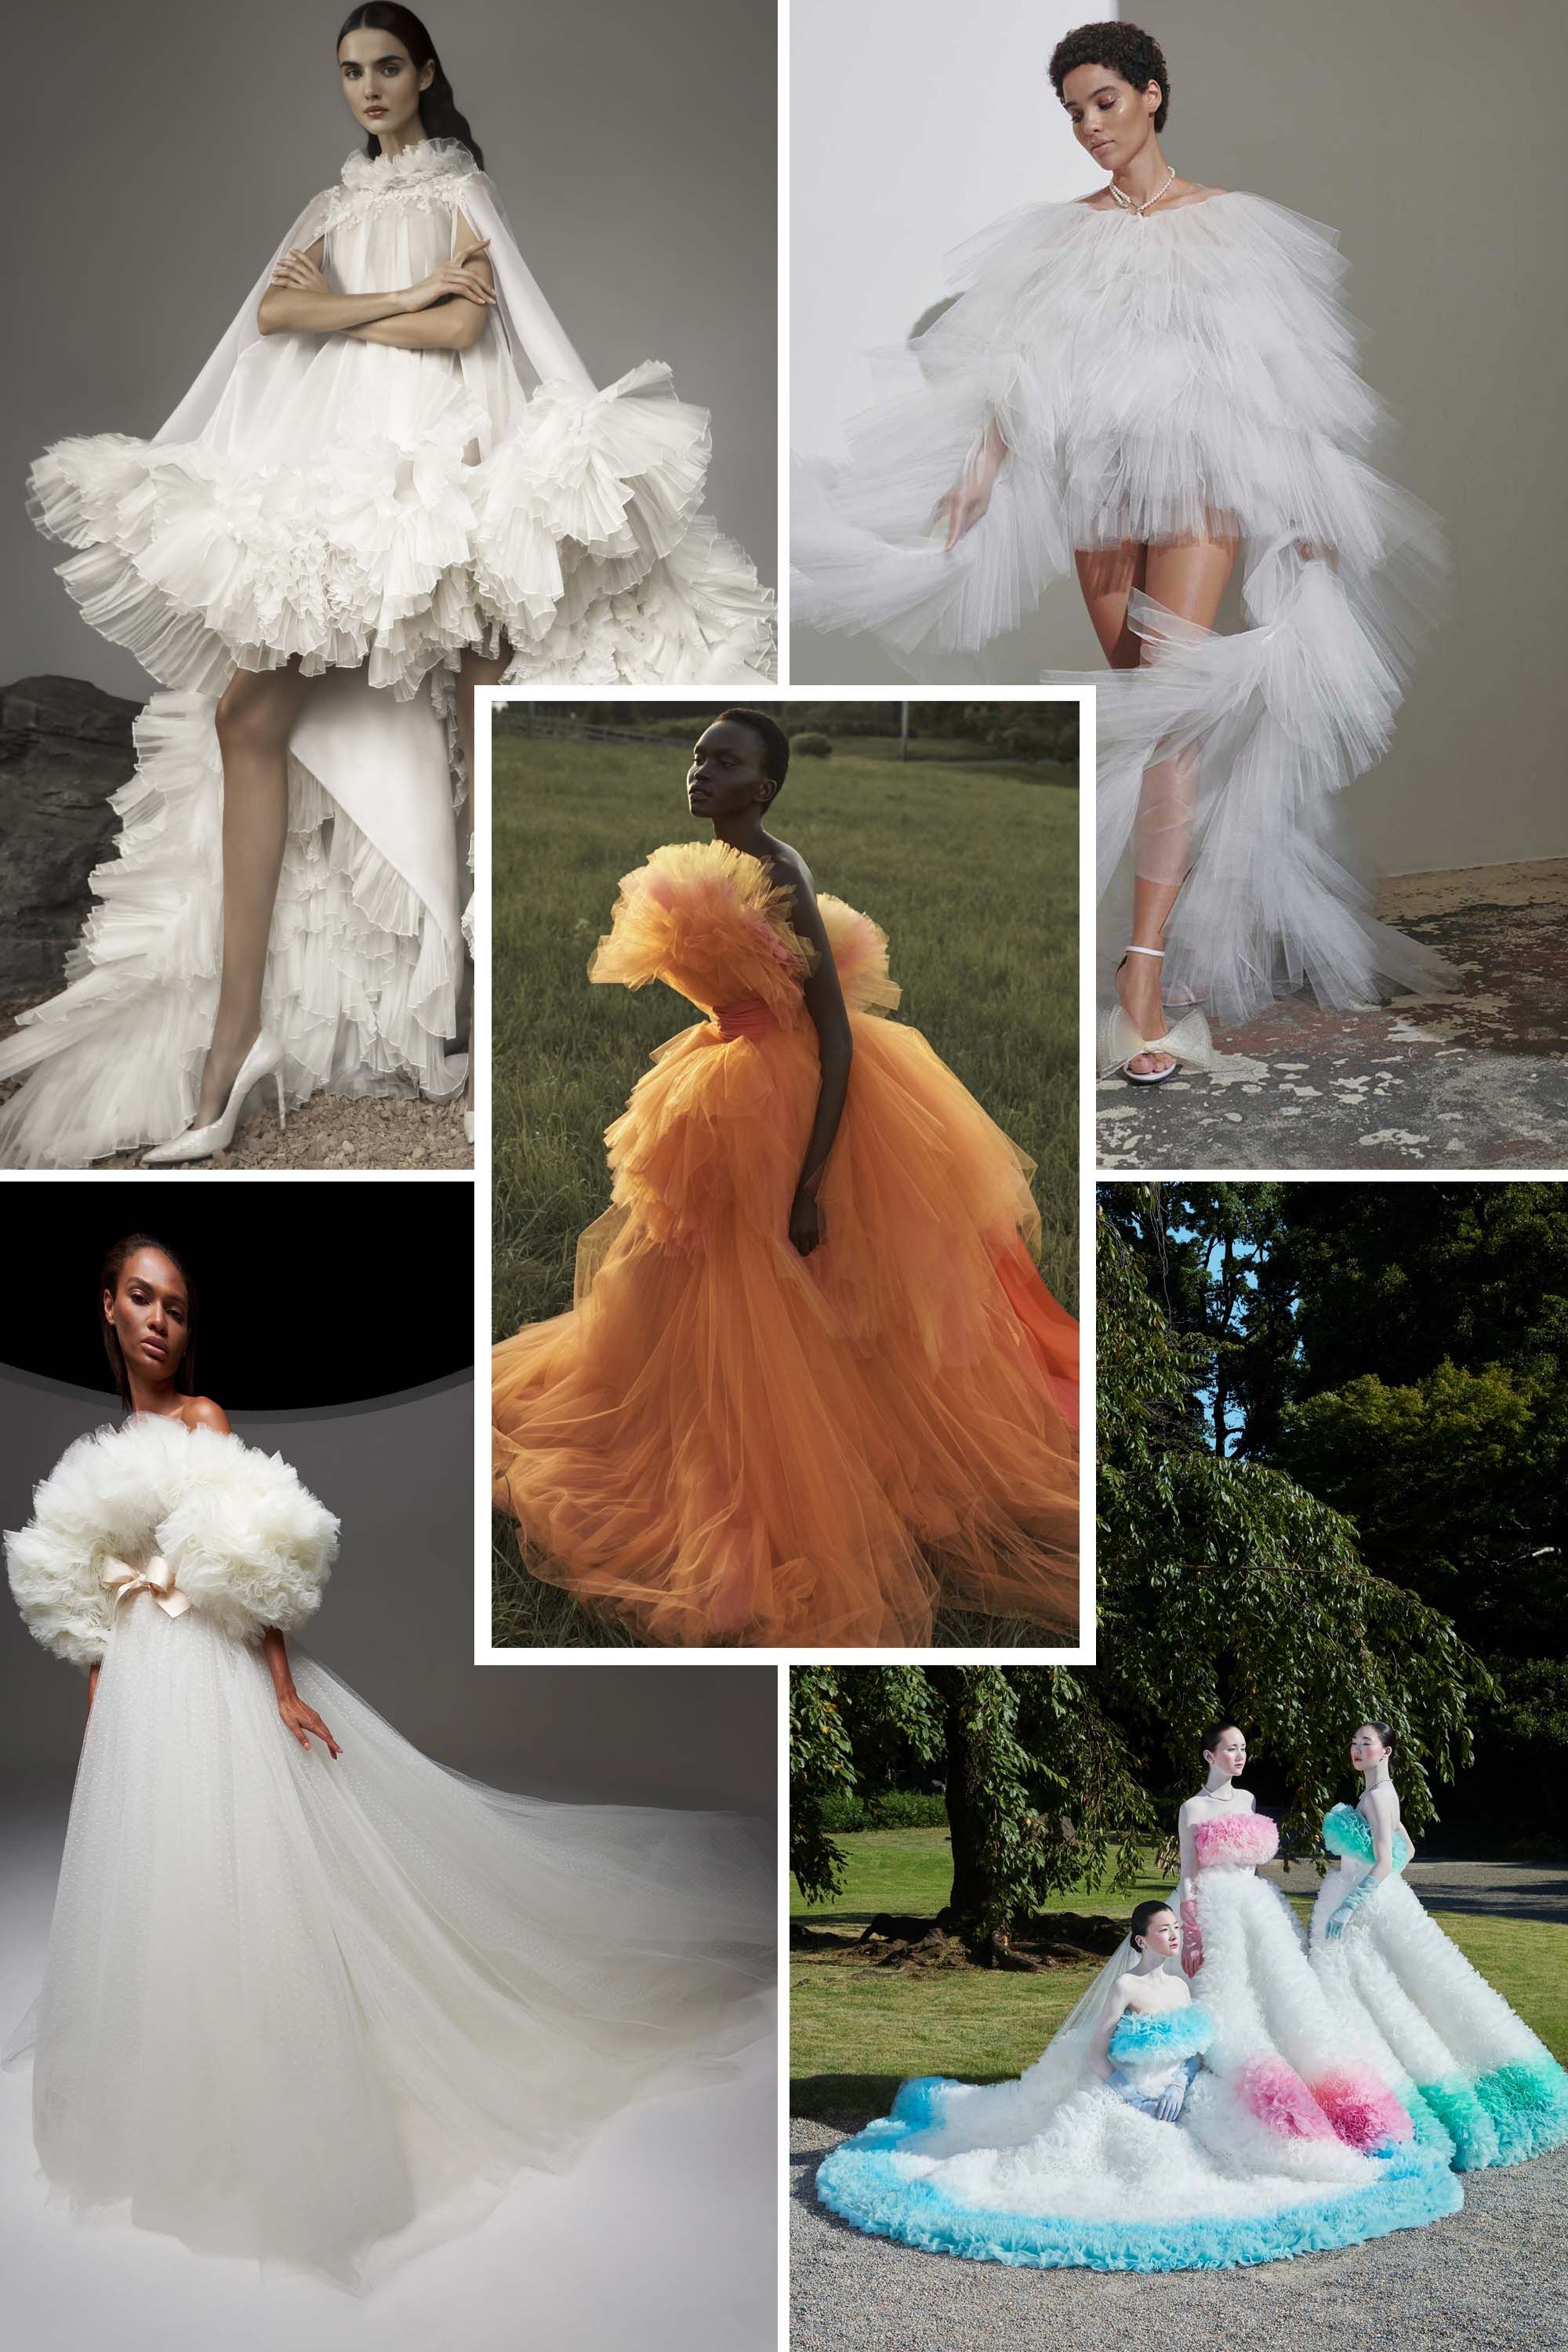 6 Wedding Dress Trends From Spring 2021 Bridal Fashion Week to Consider